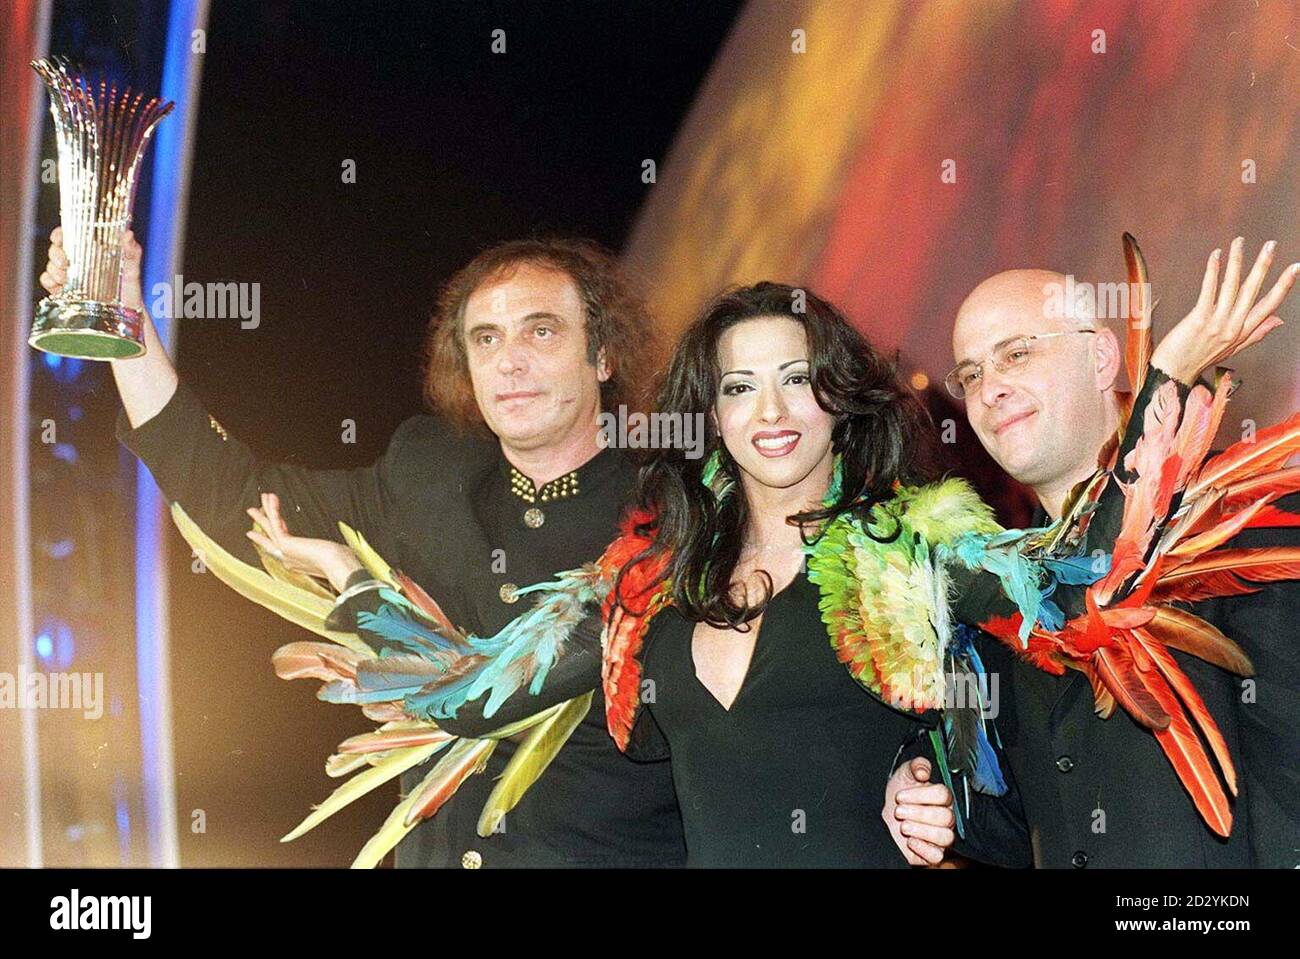 Eurovision song contest winner Dana International of Israel with composer Sviika Pick (left) and lyricist Yoav Ginal after the competition at the NIA, Birmingham. Stock Photo